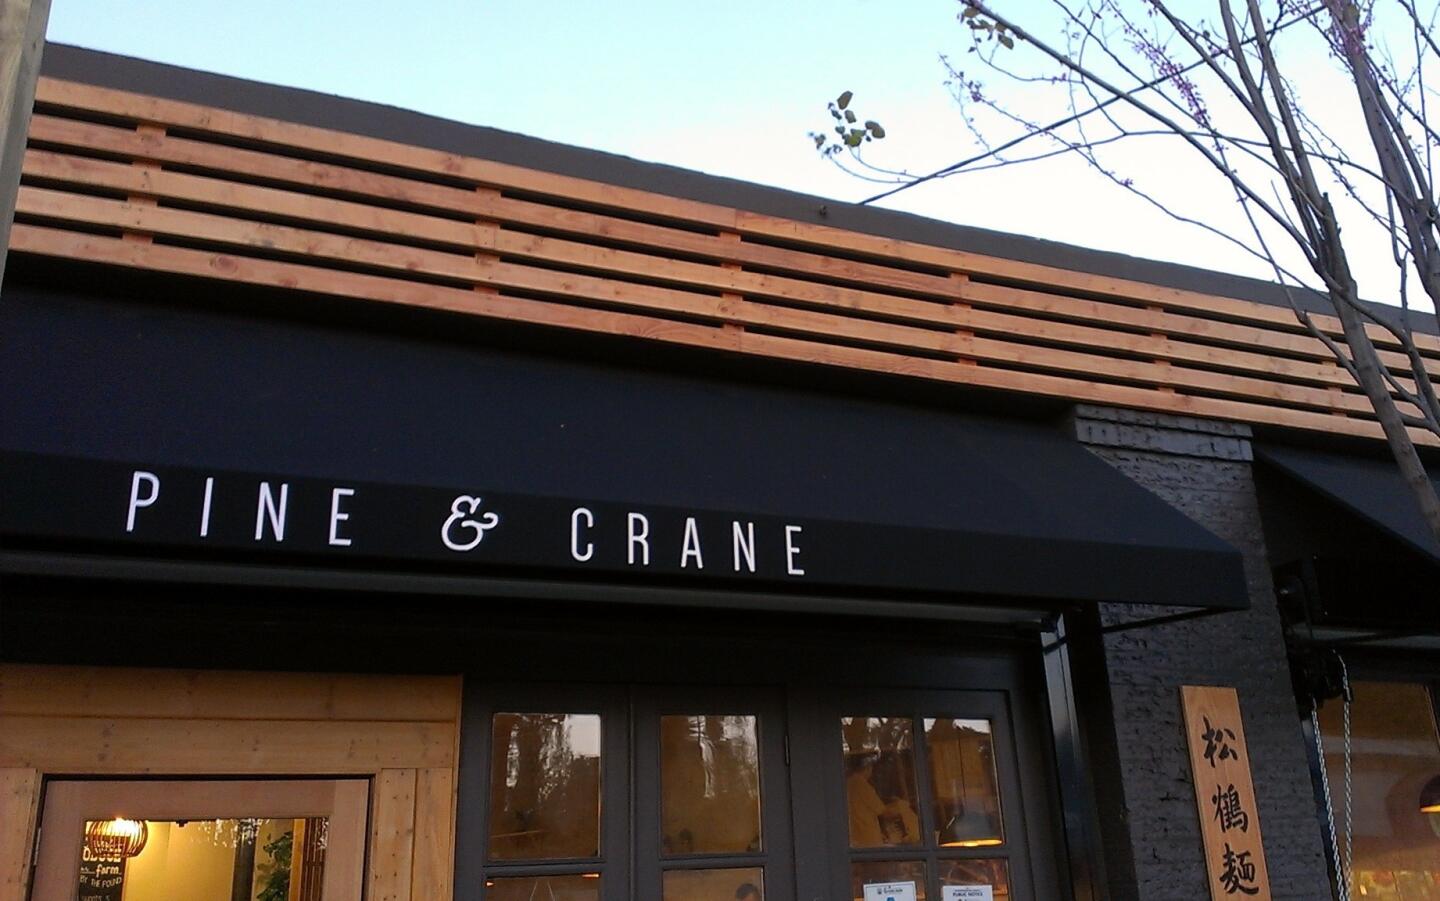 Pine & Crane opened in Silver Lake in the space that formerly housed Cru on Griffith Park Boulevard.